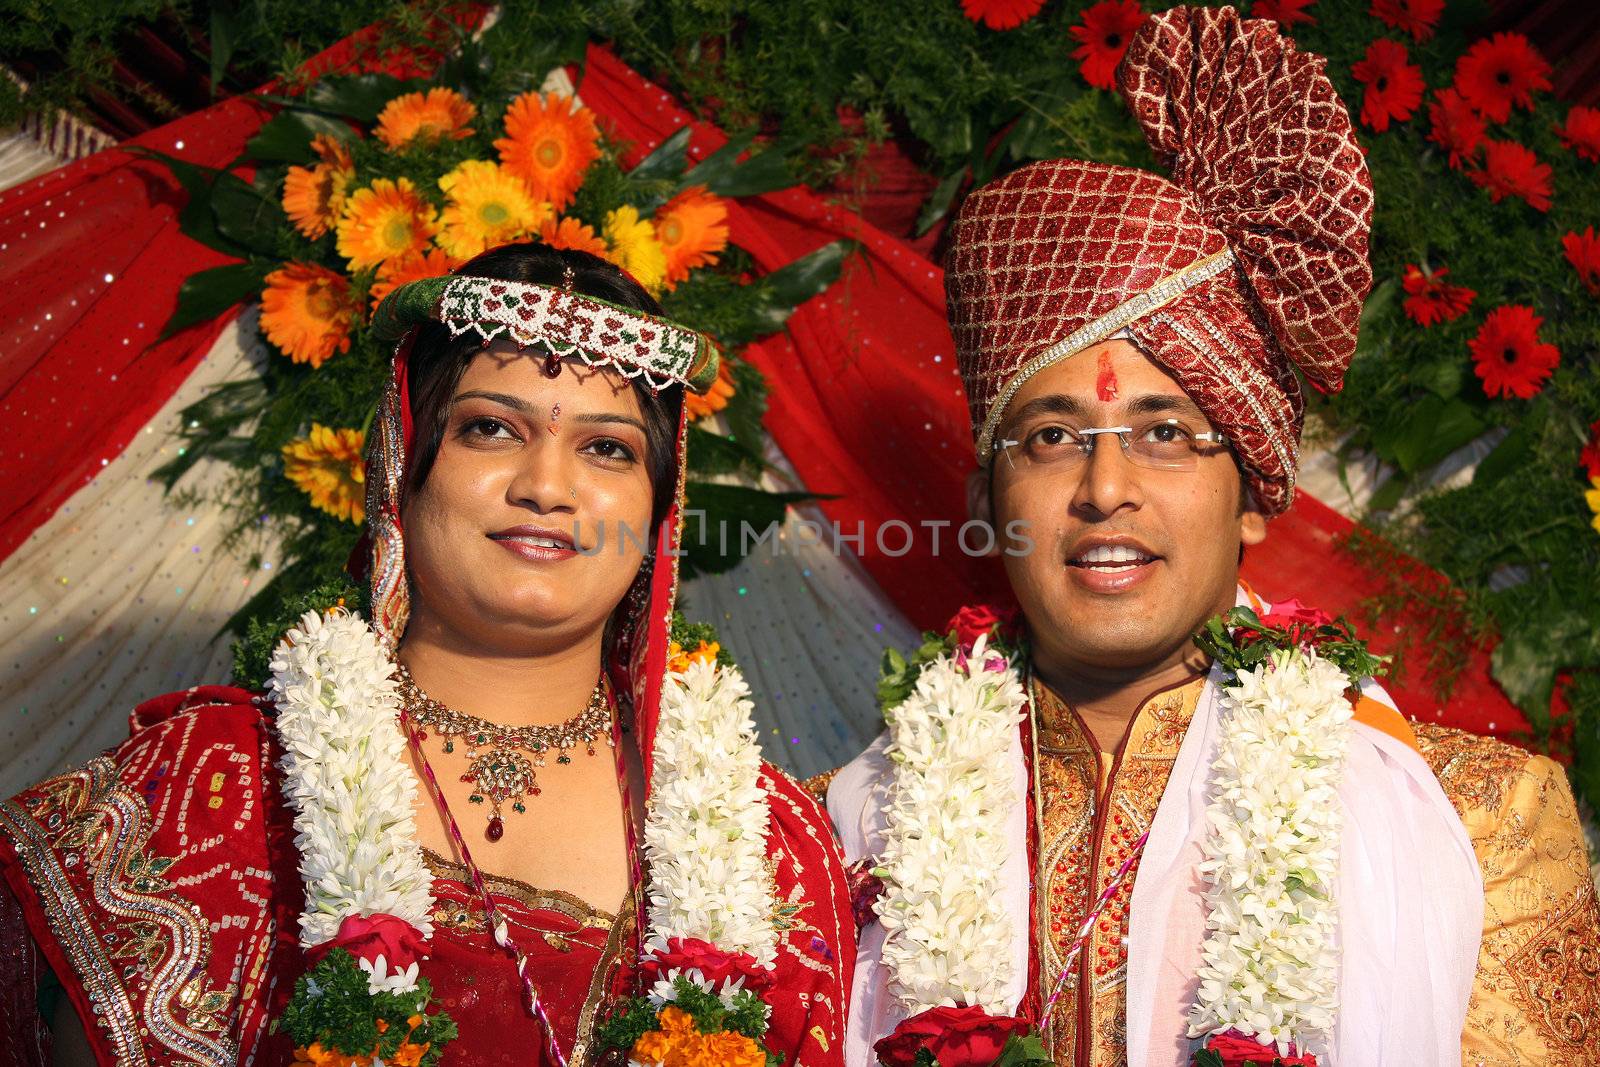 A portrait of an Indian wedding couple in their traditional attire.